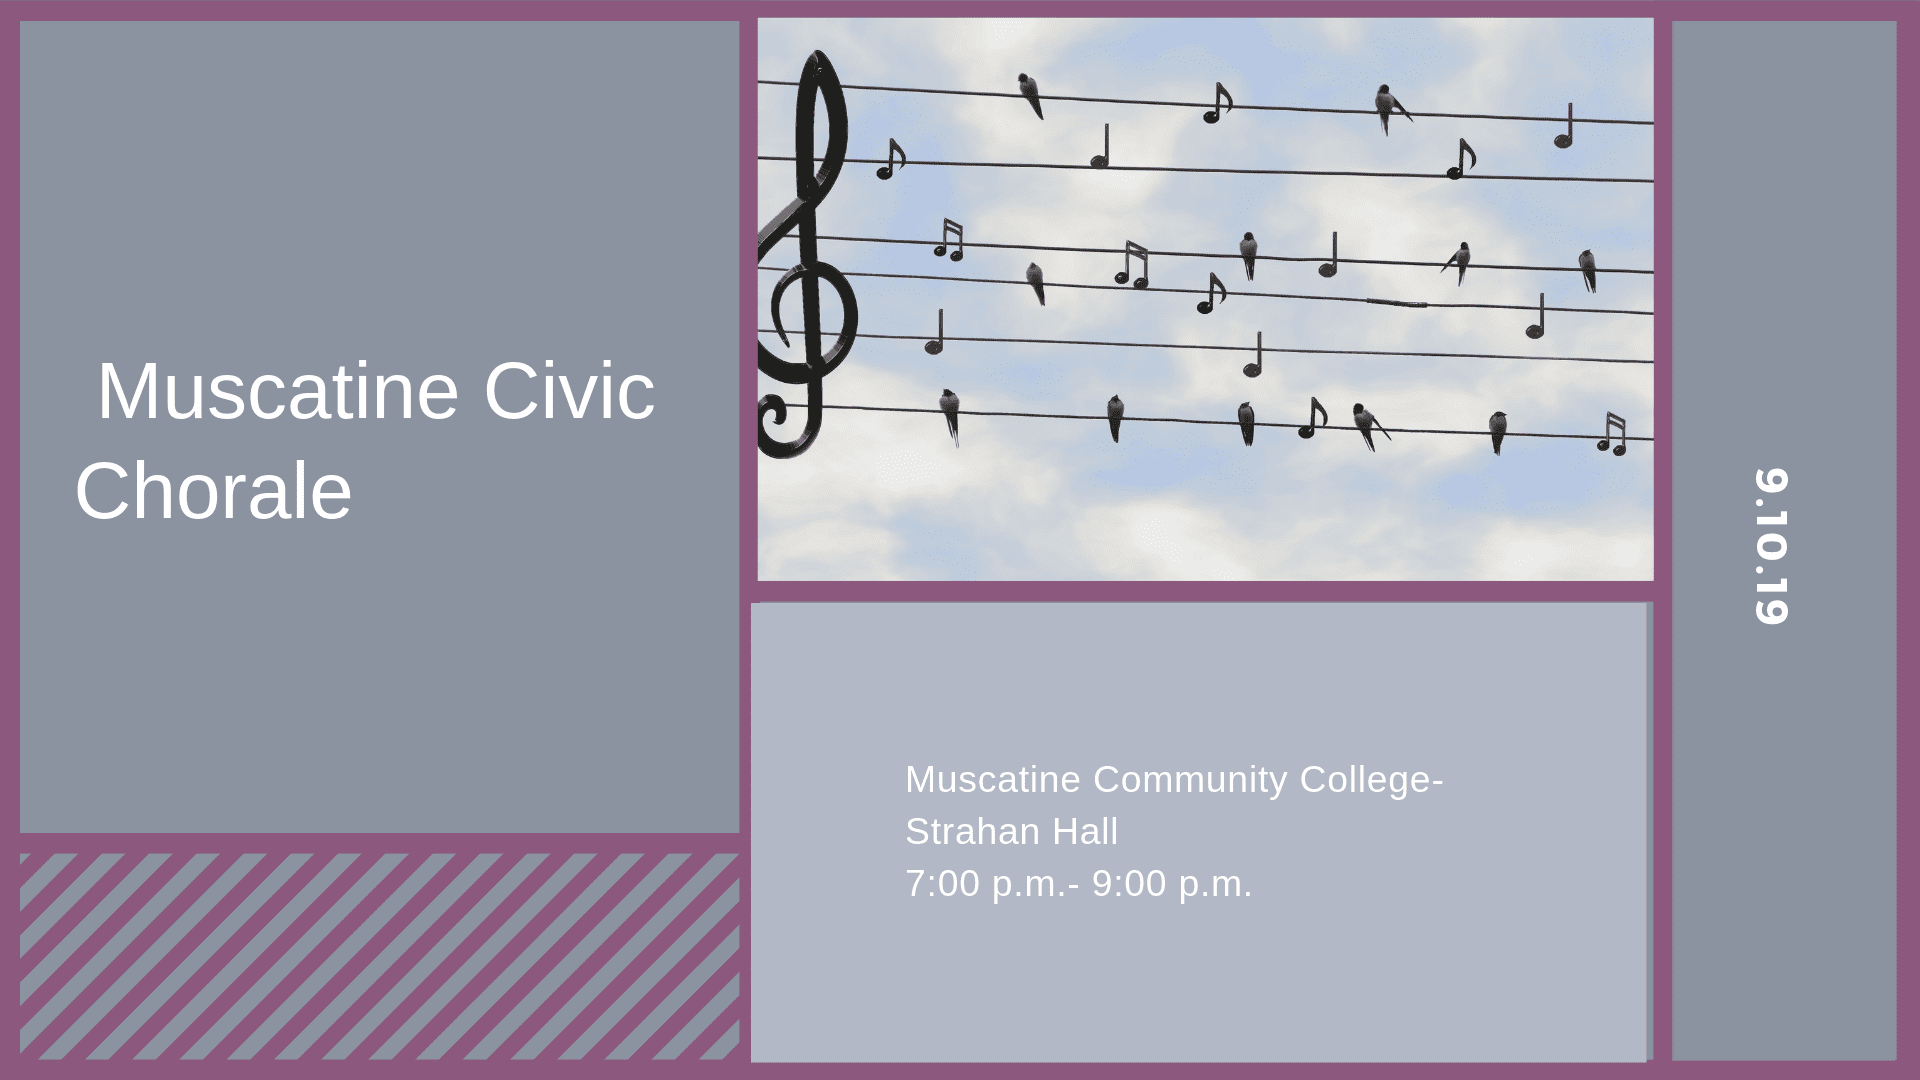 Muscatine Civic Chorale